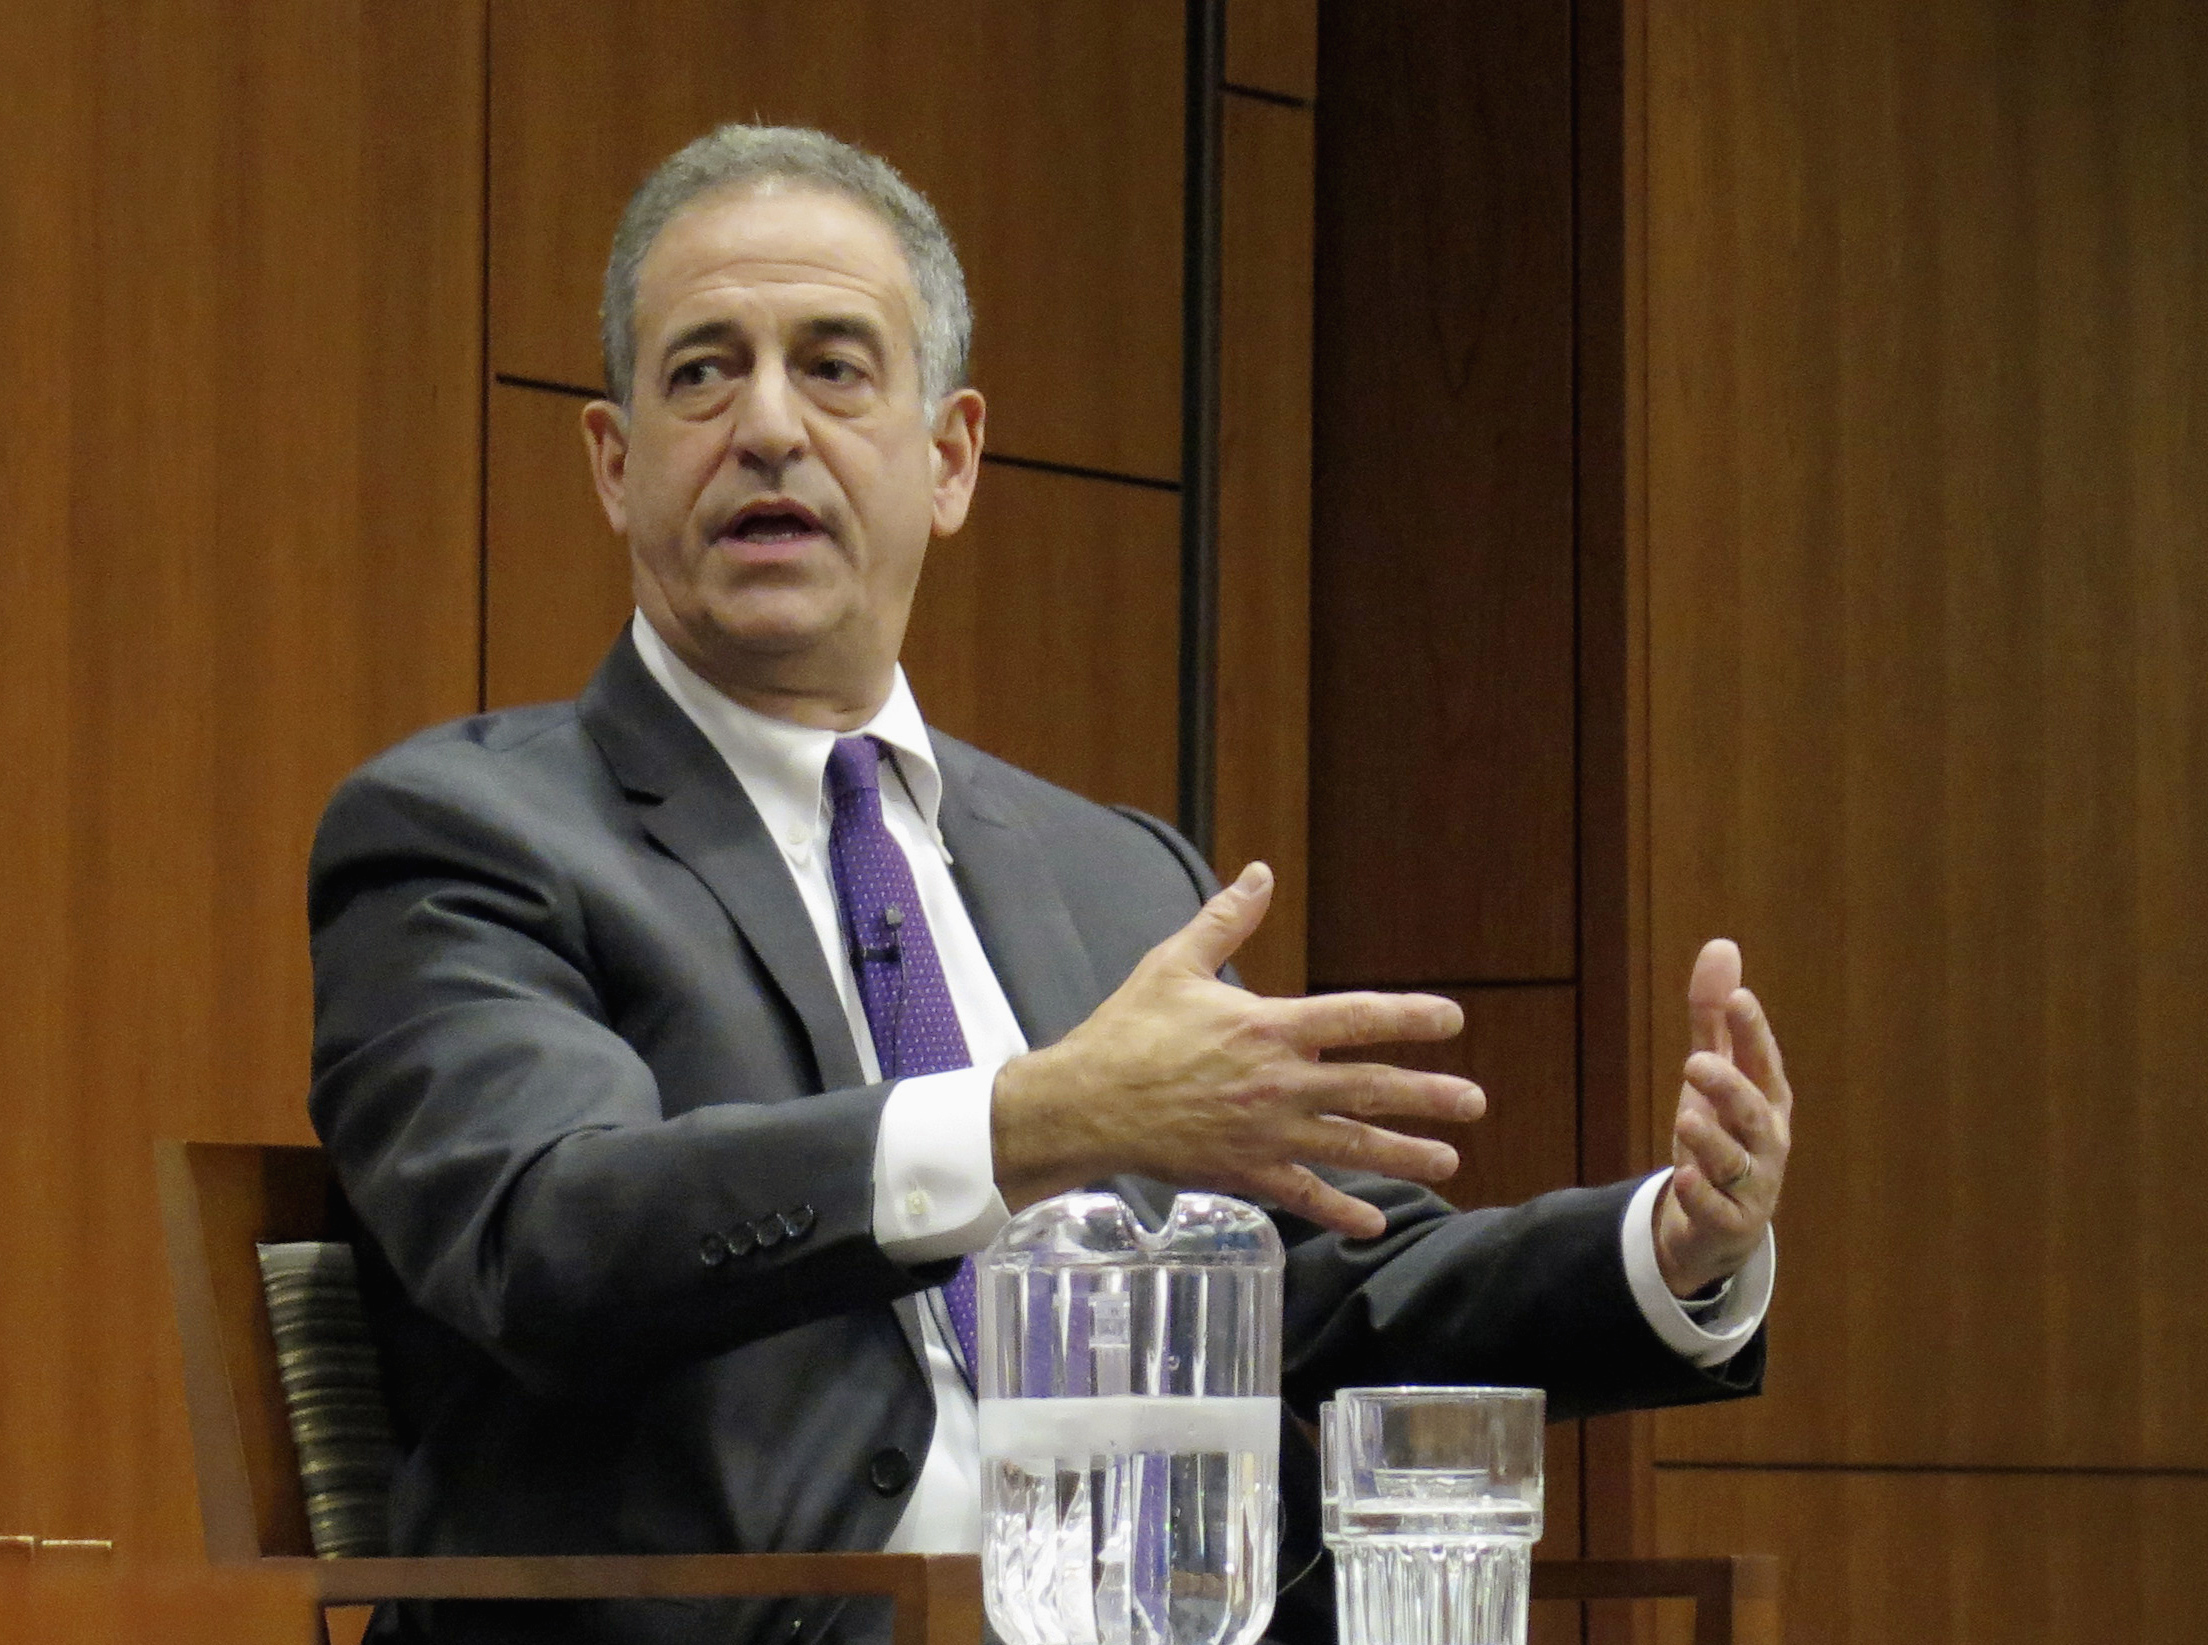 Justice Clarence Thomas should be subpoenaed to testify, says former US Sen. Russ Feingold